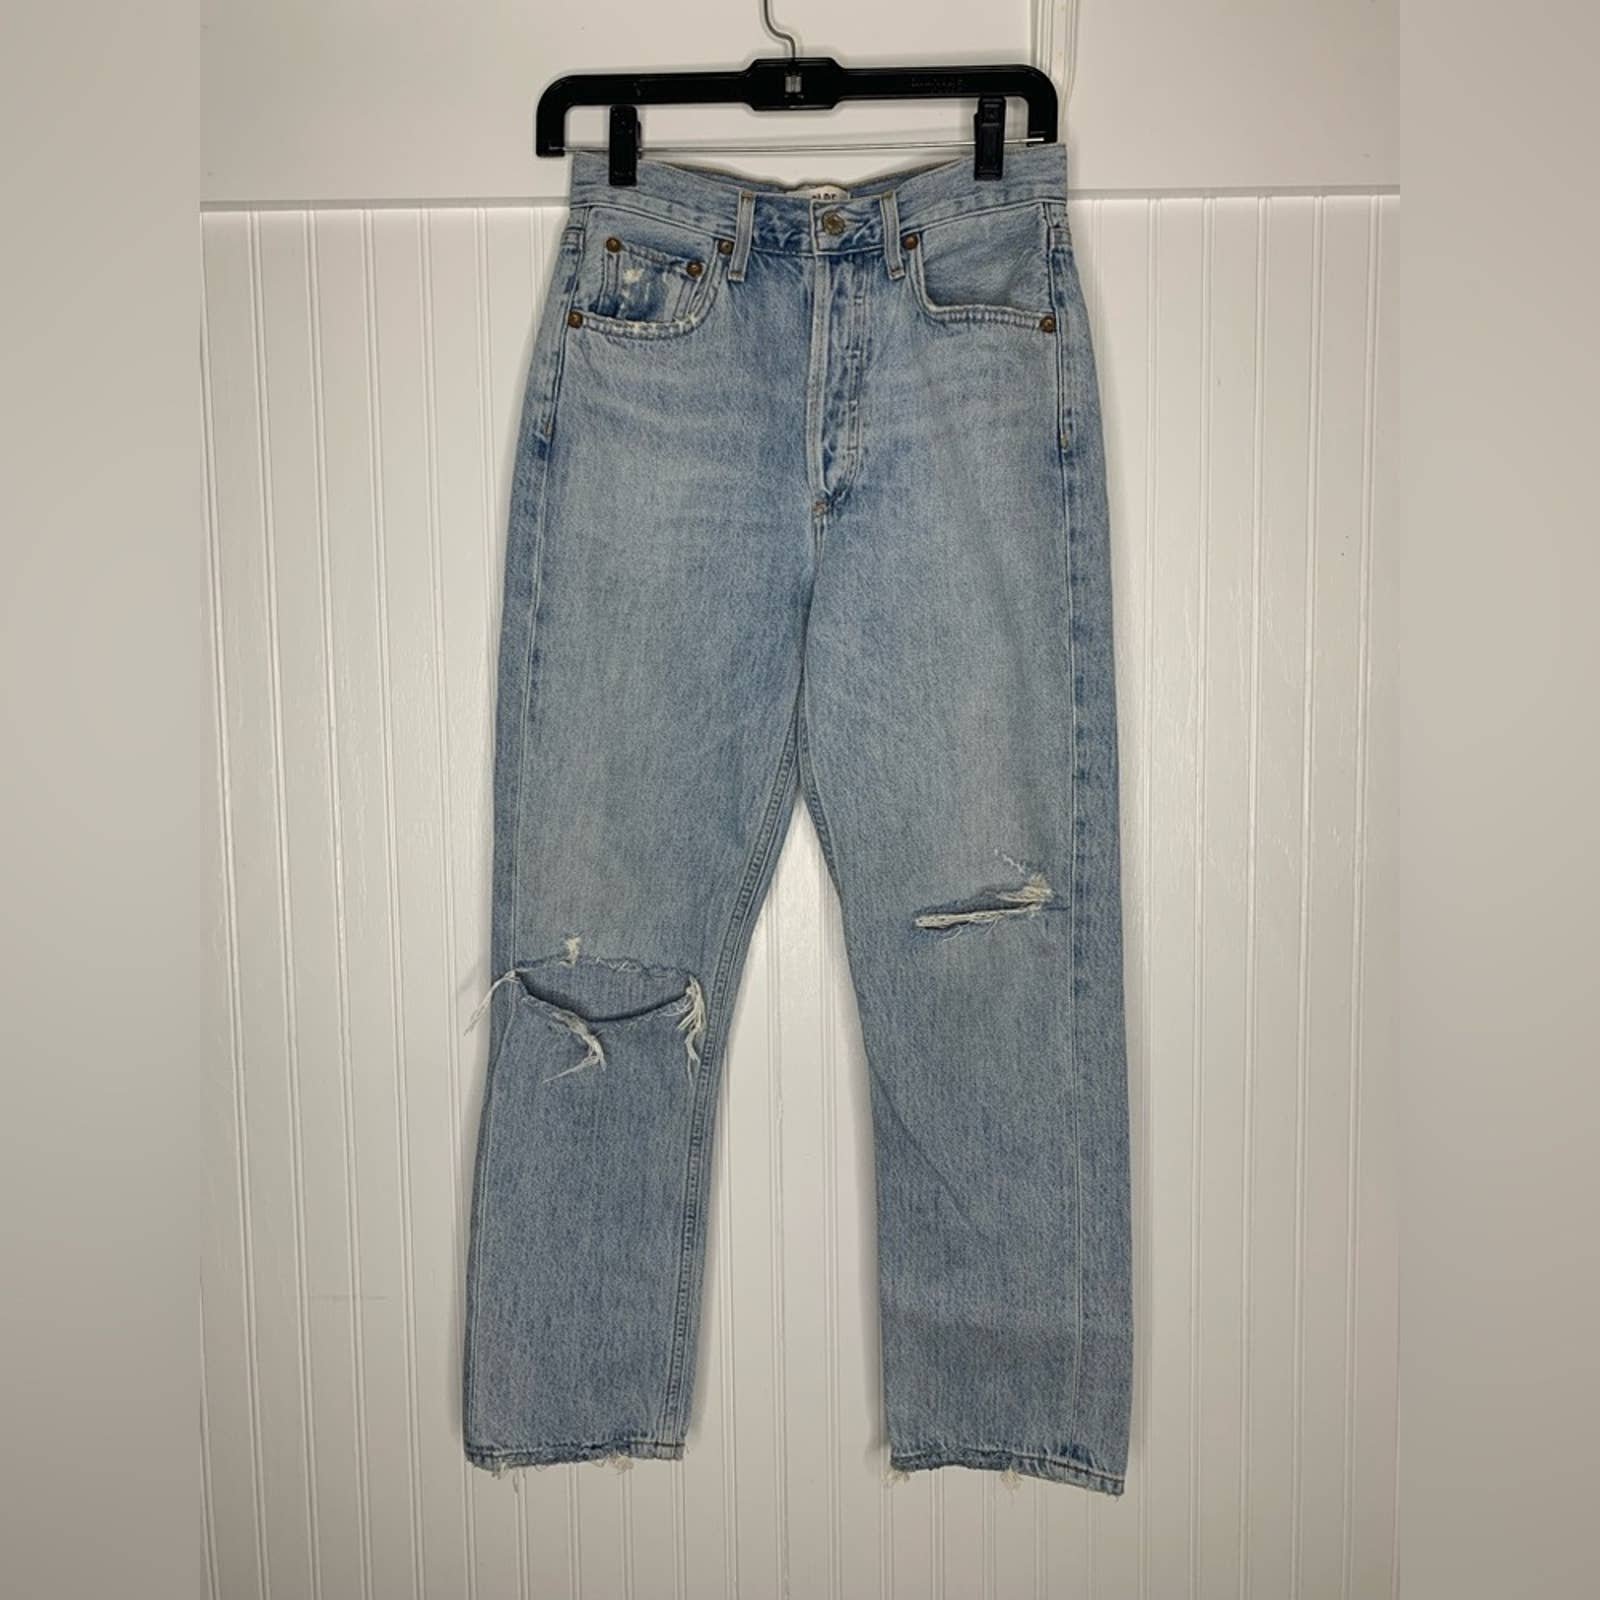 high discount Agolde Riley High Rise Straight Cropped Jeans in Blitz PiePIi5JO outlet online shop